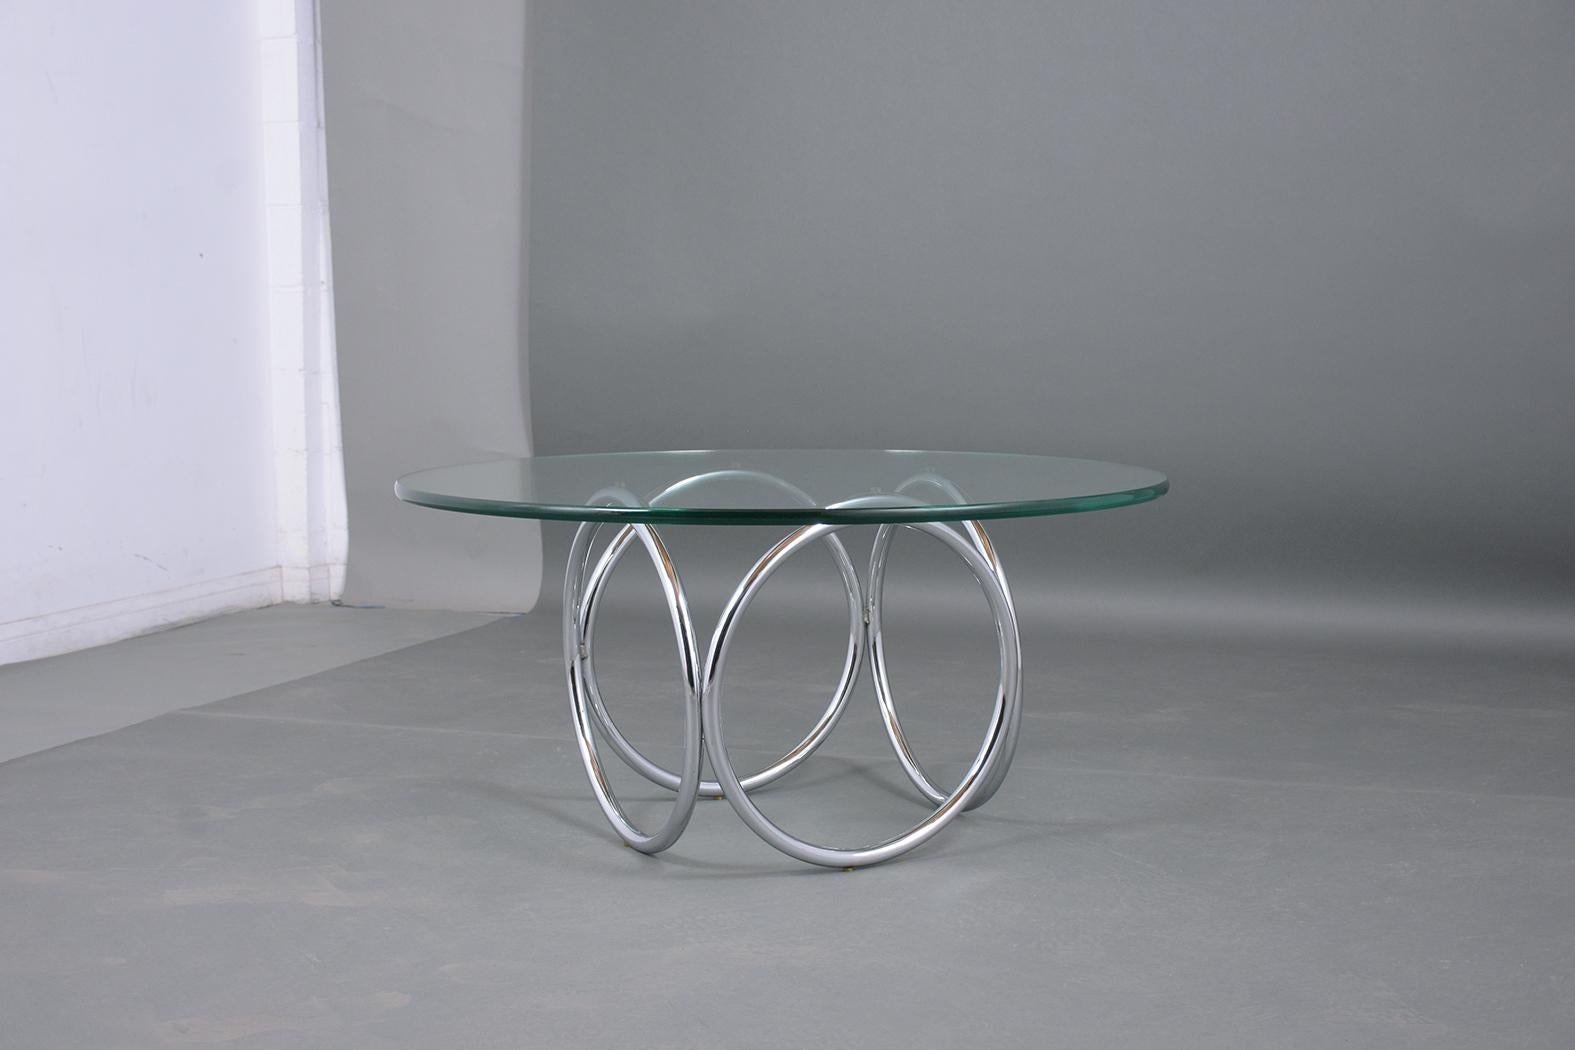 Polished Restored Vintage 1960s Mid-Century Modern Chrome Side Table with Round Glass Top For Sale